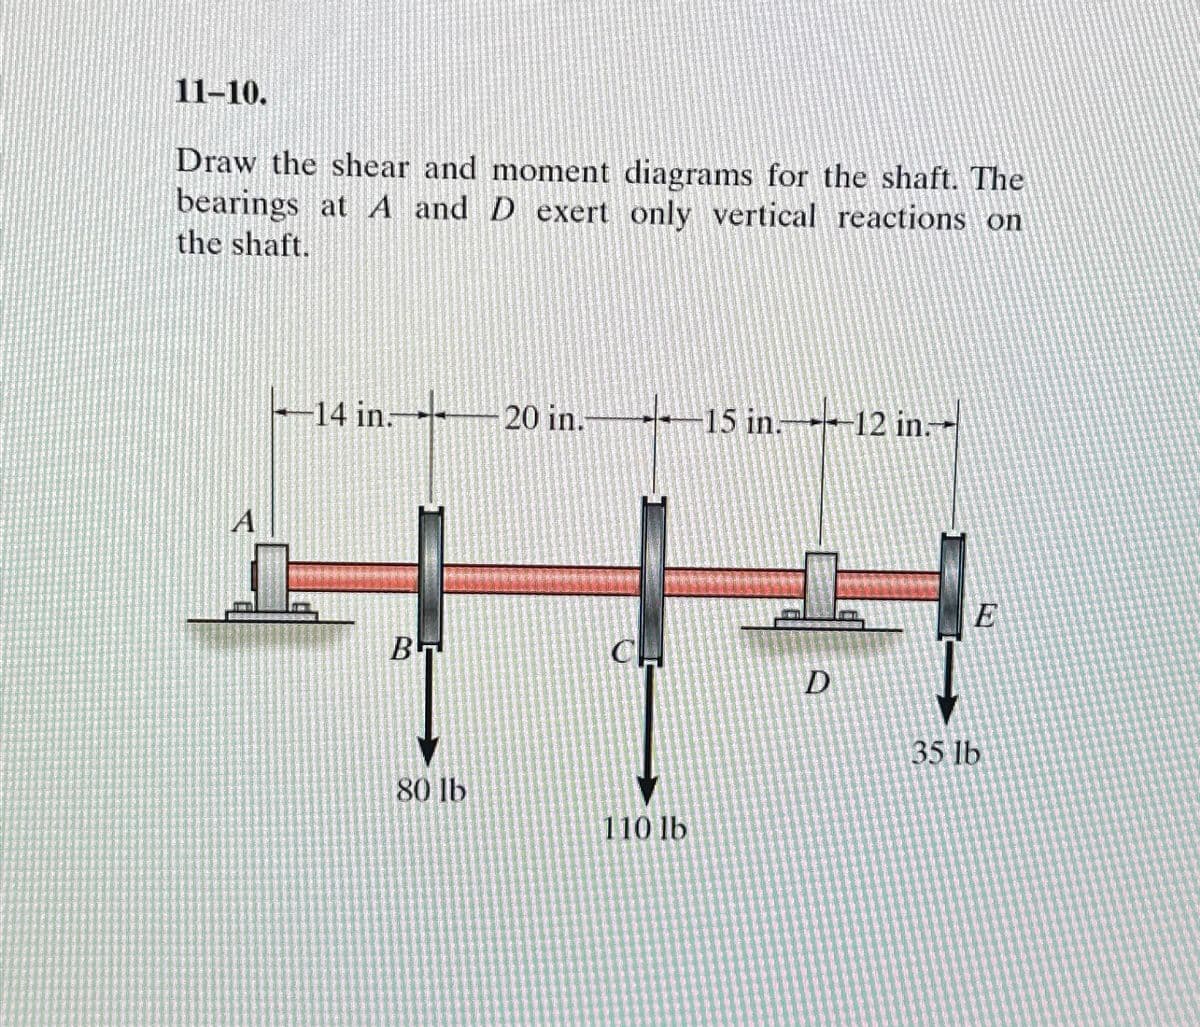 11-10.
Draw the shear and moment diagrams for the shaft. The
bearings at A and D exert only vertical reactions on
the shaft.
A
14 in:
20 in.
15 in.-12 in.
E
B
C
D
35 lb
80 lb
110 lb